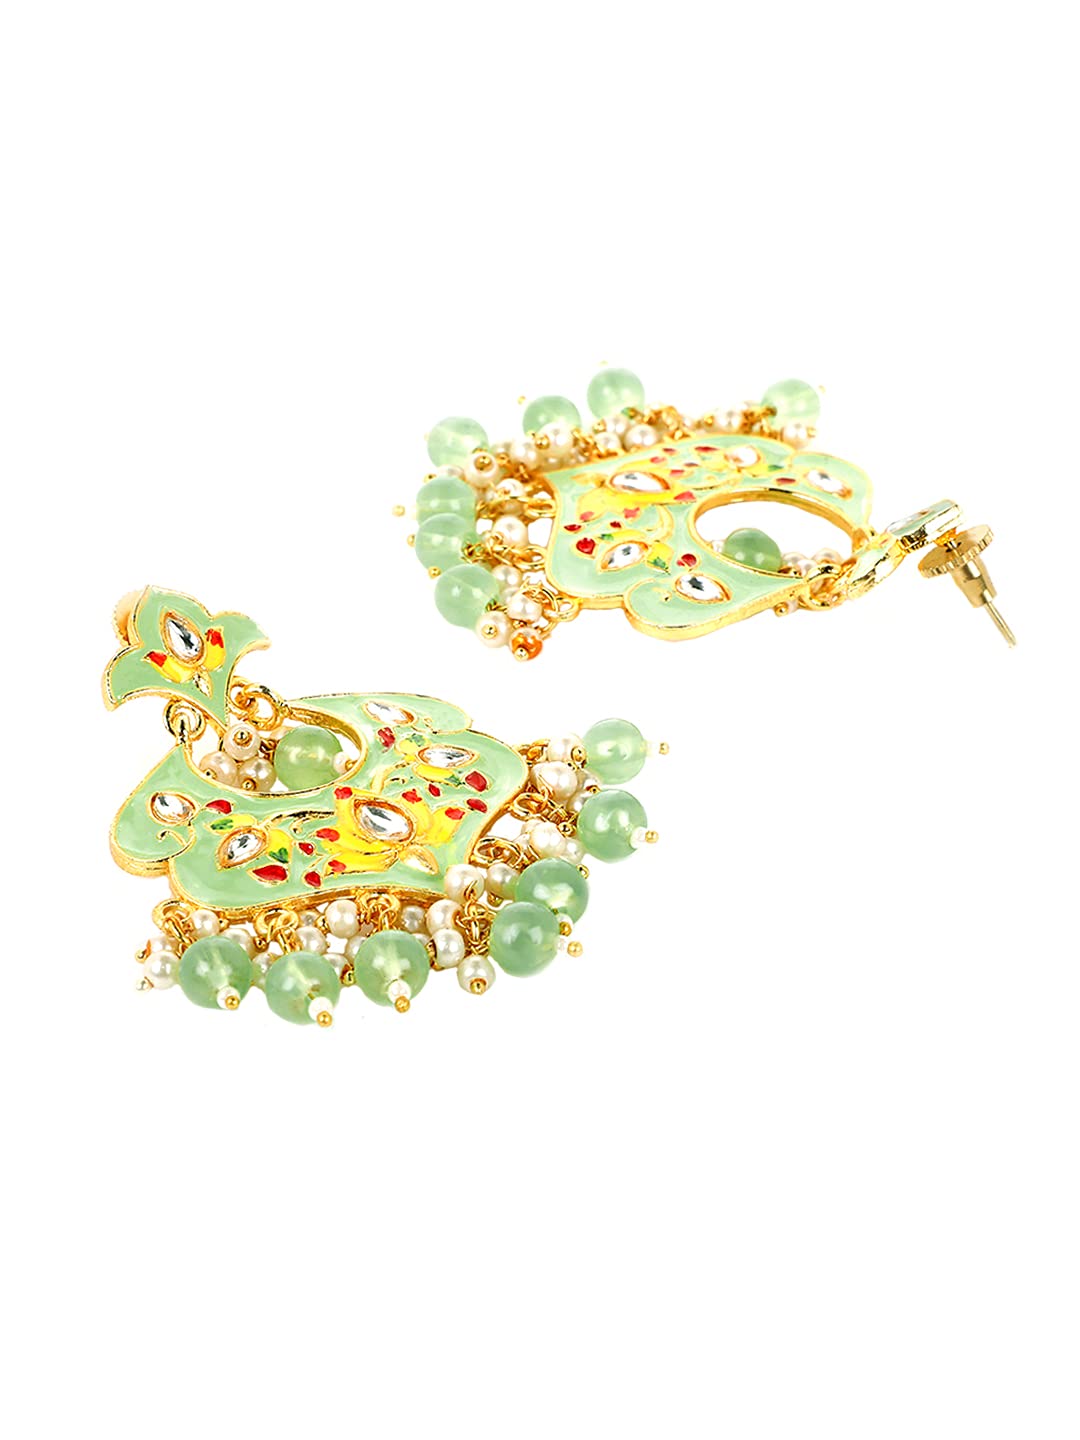 Yellow Chimes Ethnic Gold Plated Traditional Beads Green Meenakari Floral Design Chandbali Earrings for Women and Girls, Medium (YCTJER-99MNKFLW-GR)